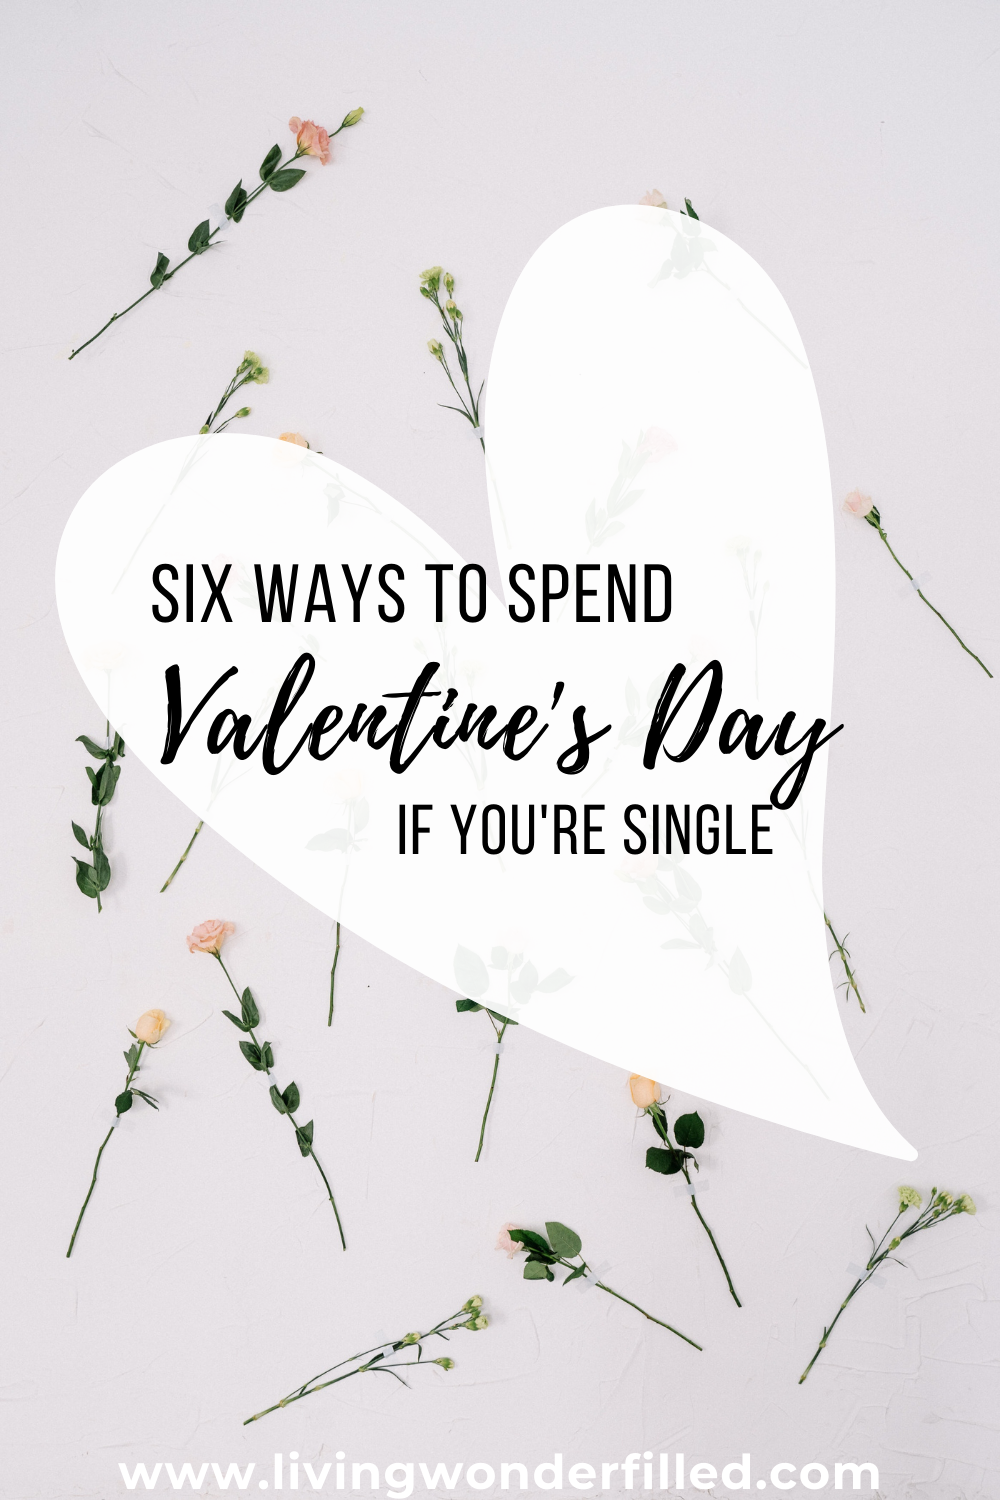 6 ways to spend valentines day if you're single